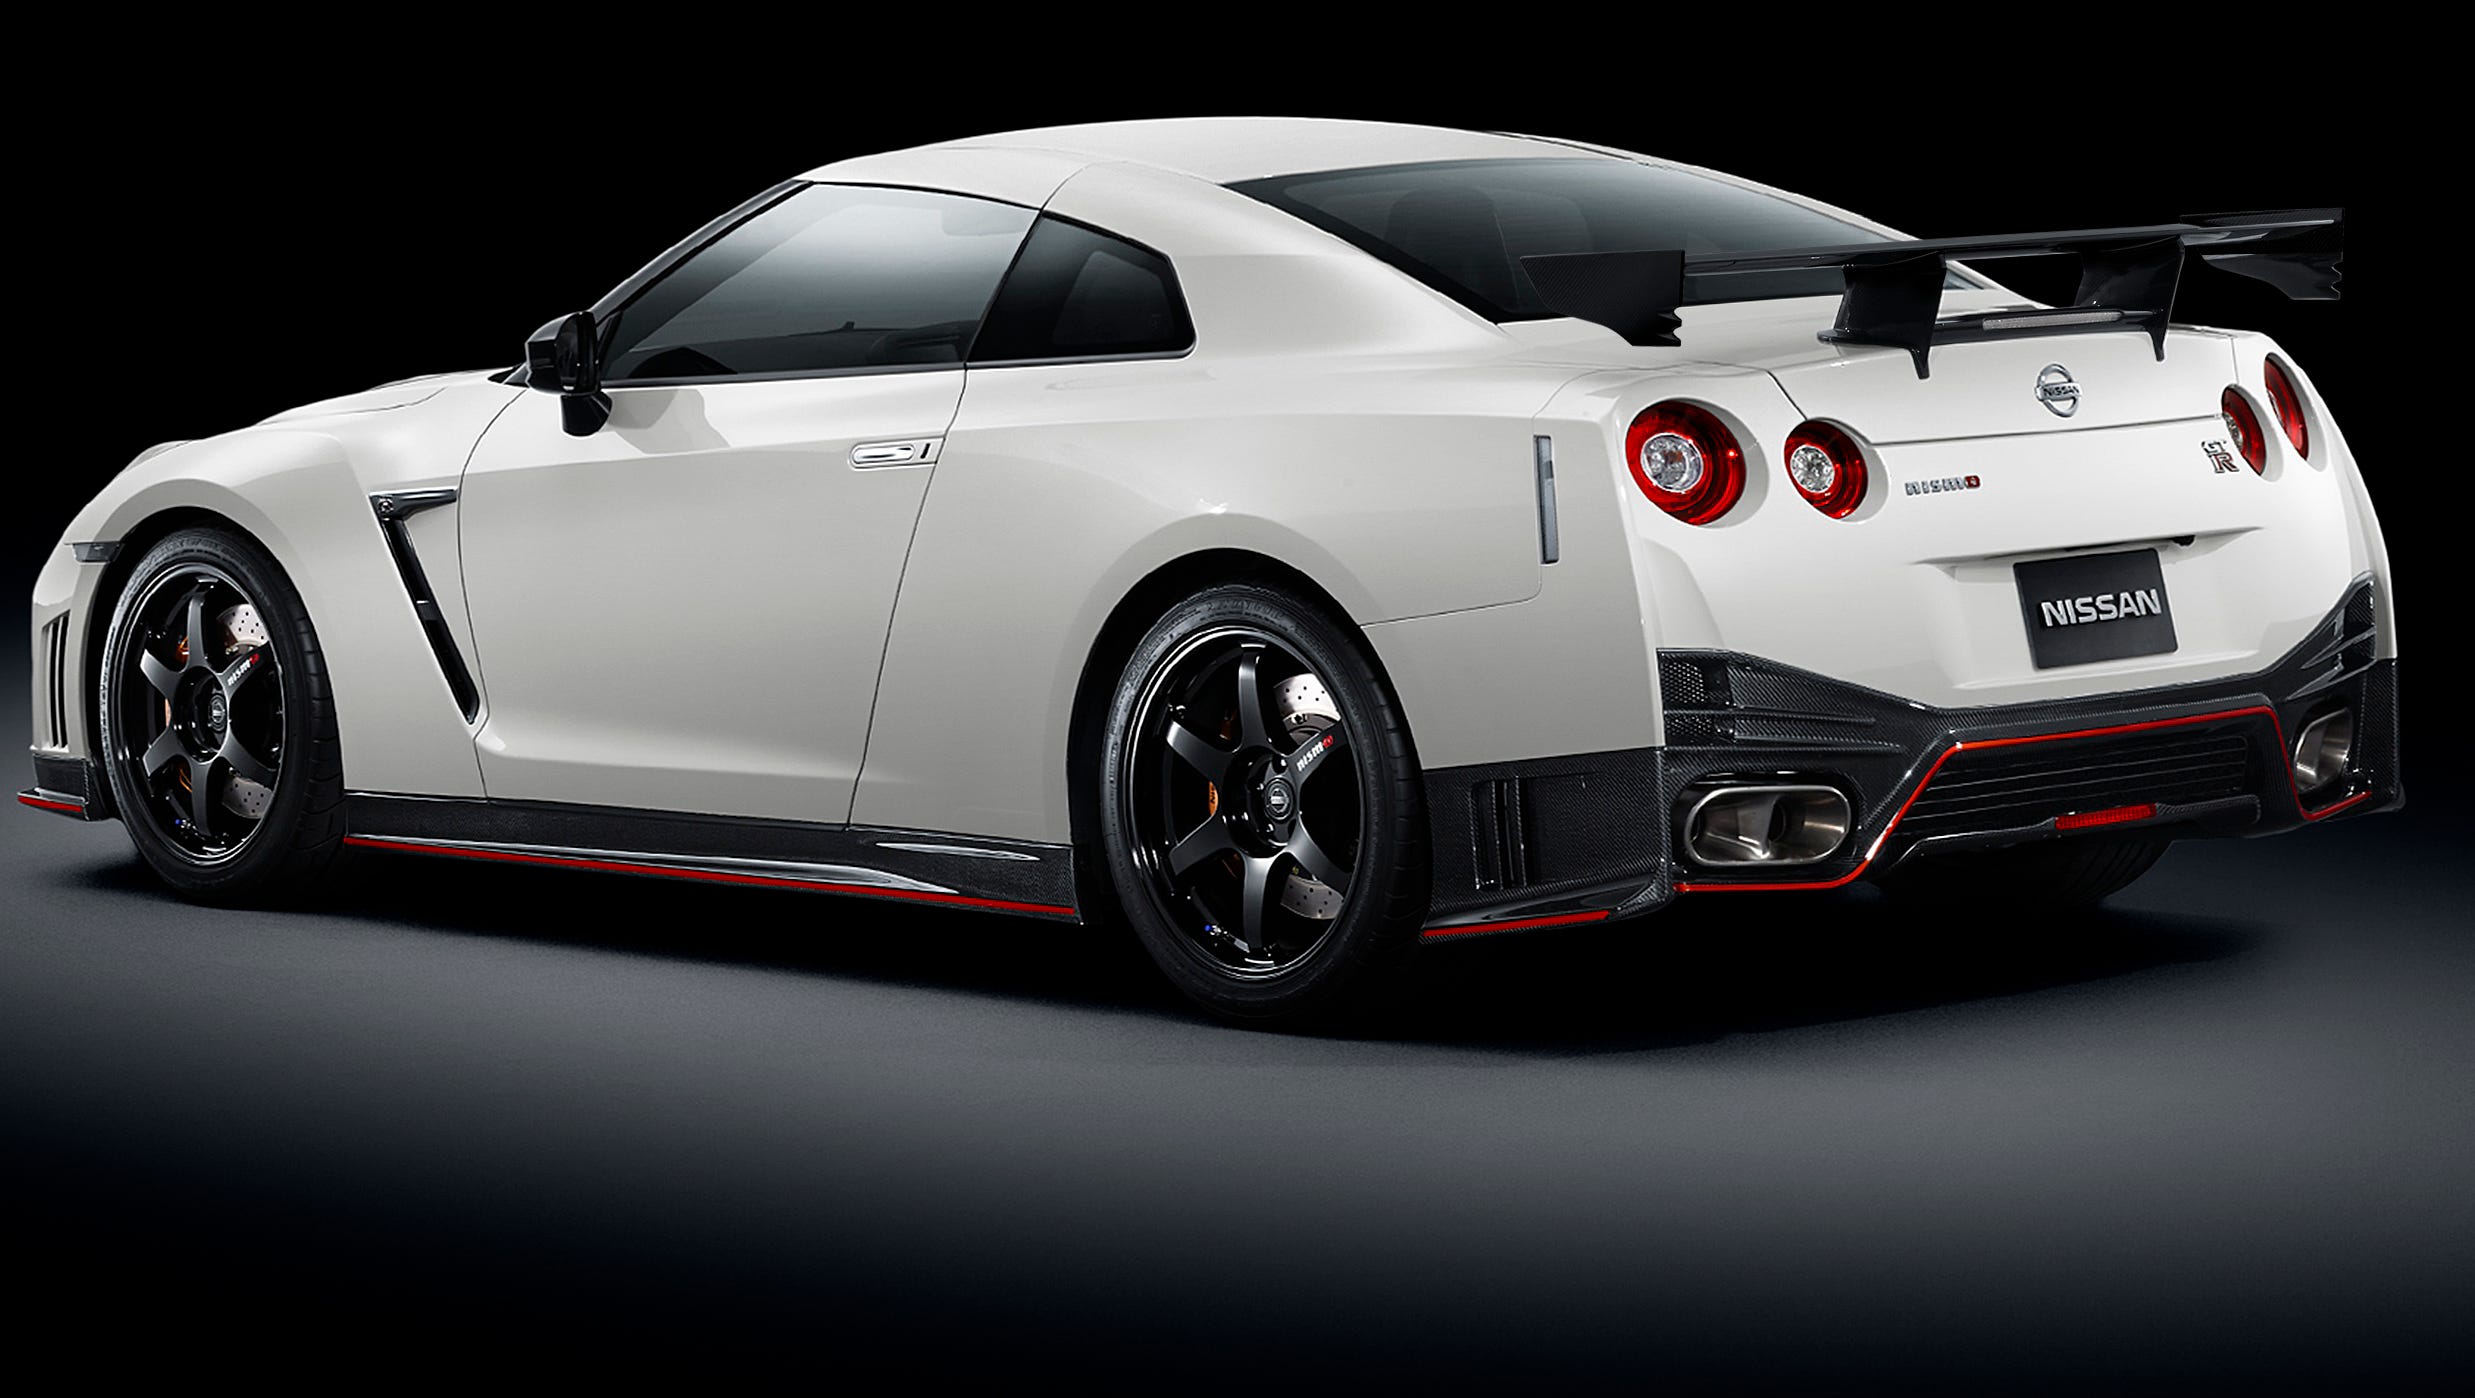 Nissan shows off new GT-R sports car in Tokyo